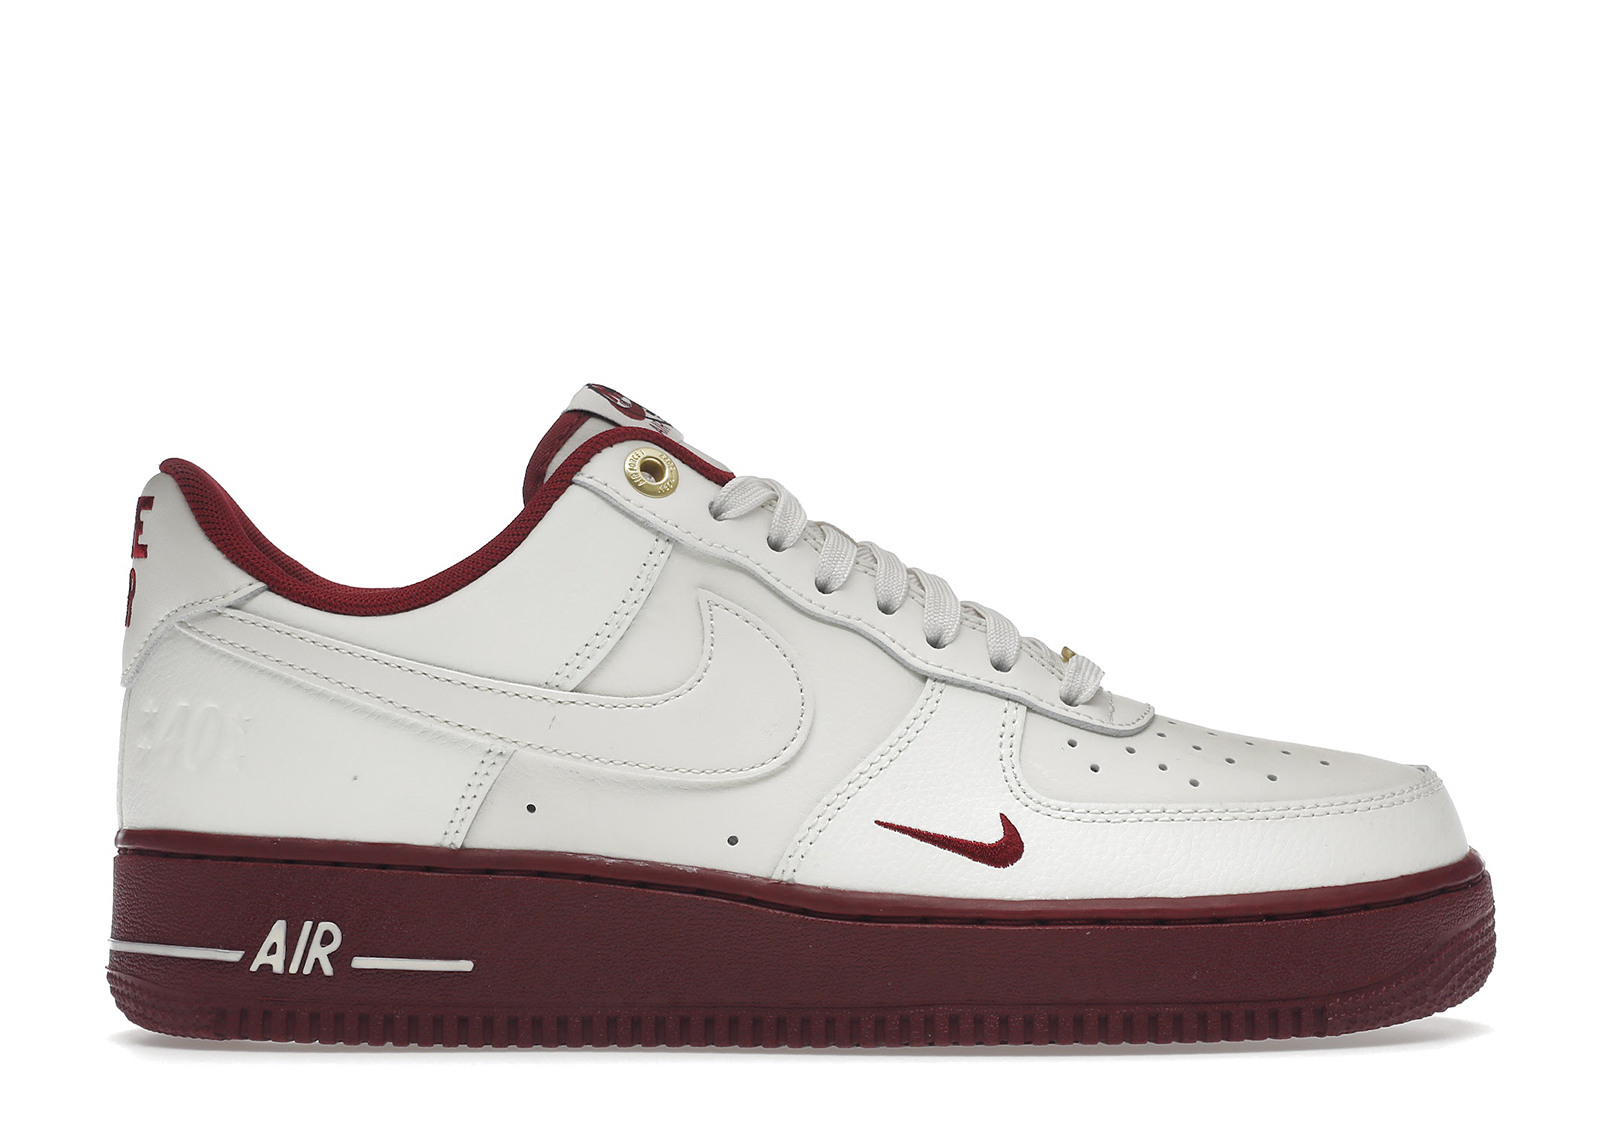 Nike Air Force 1 Low '07 SE 40th Anniversary Edition Sail Team Red 